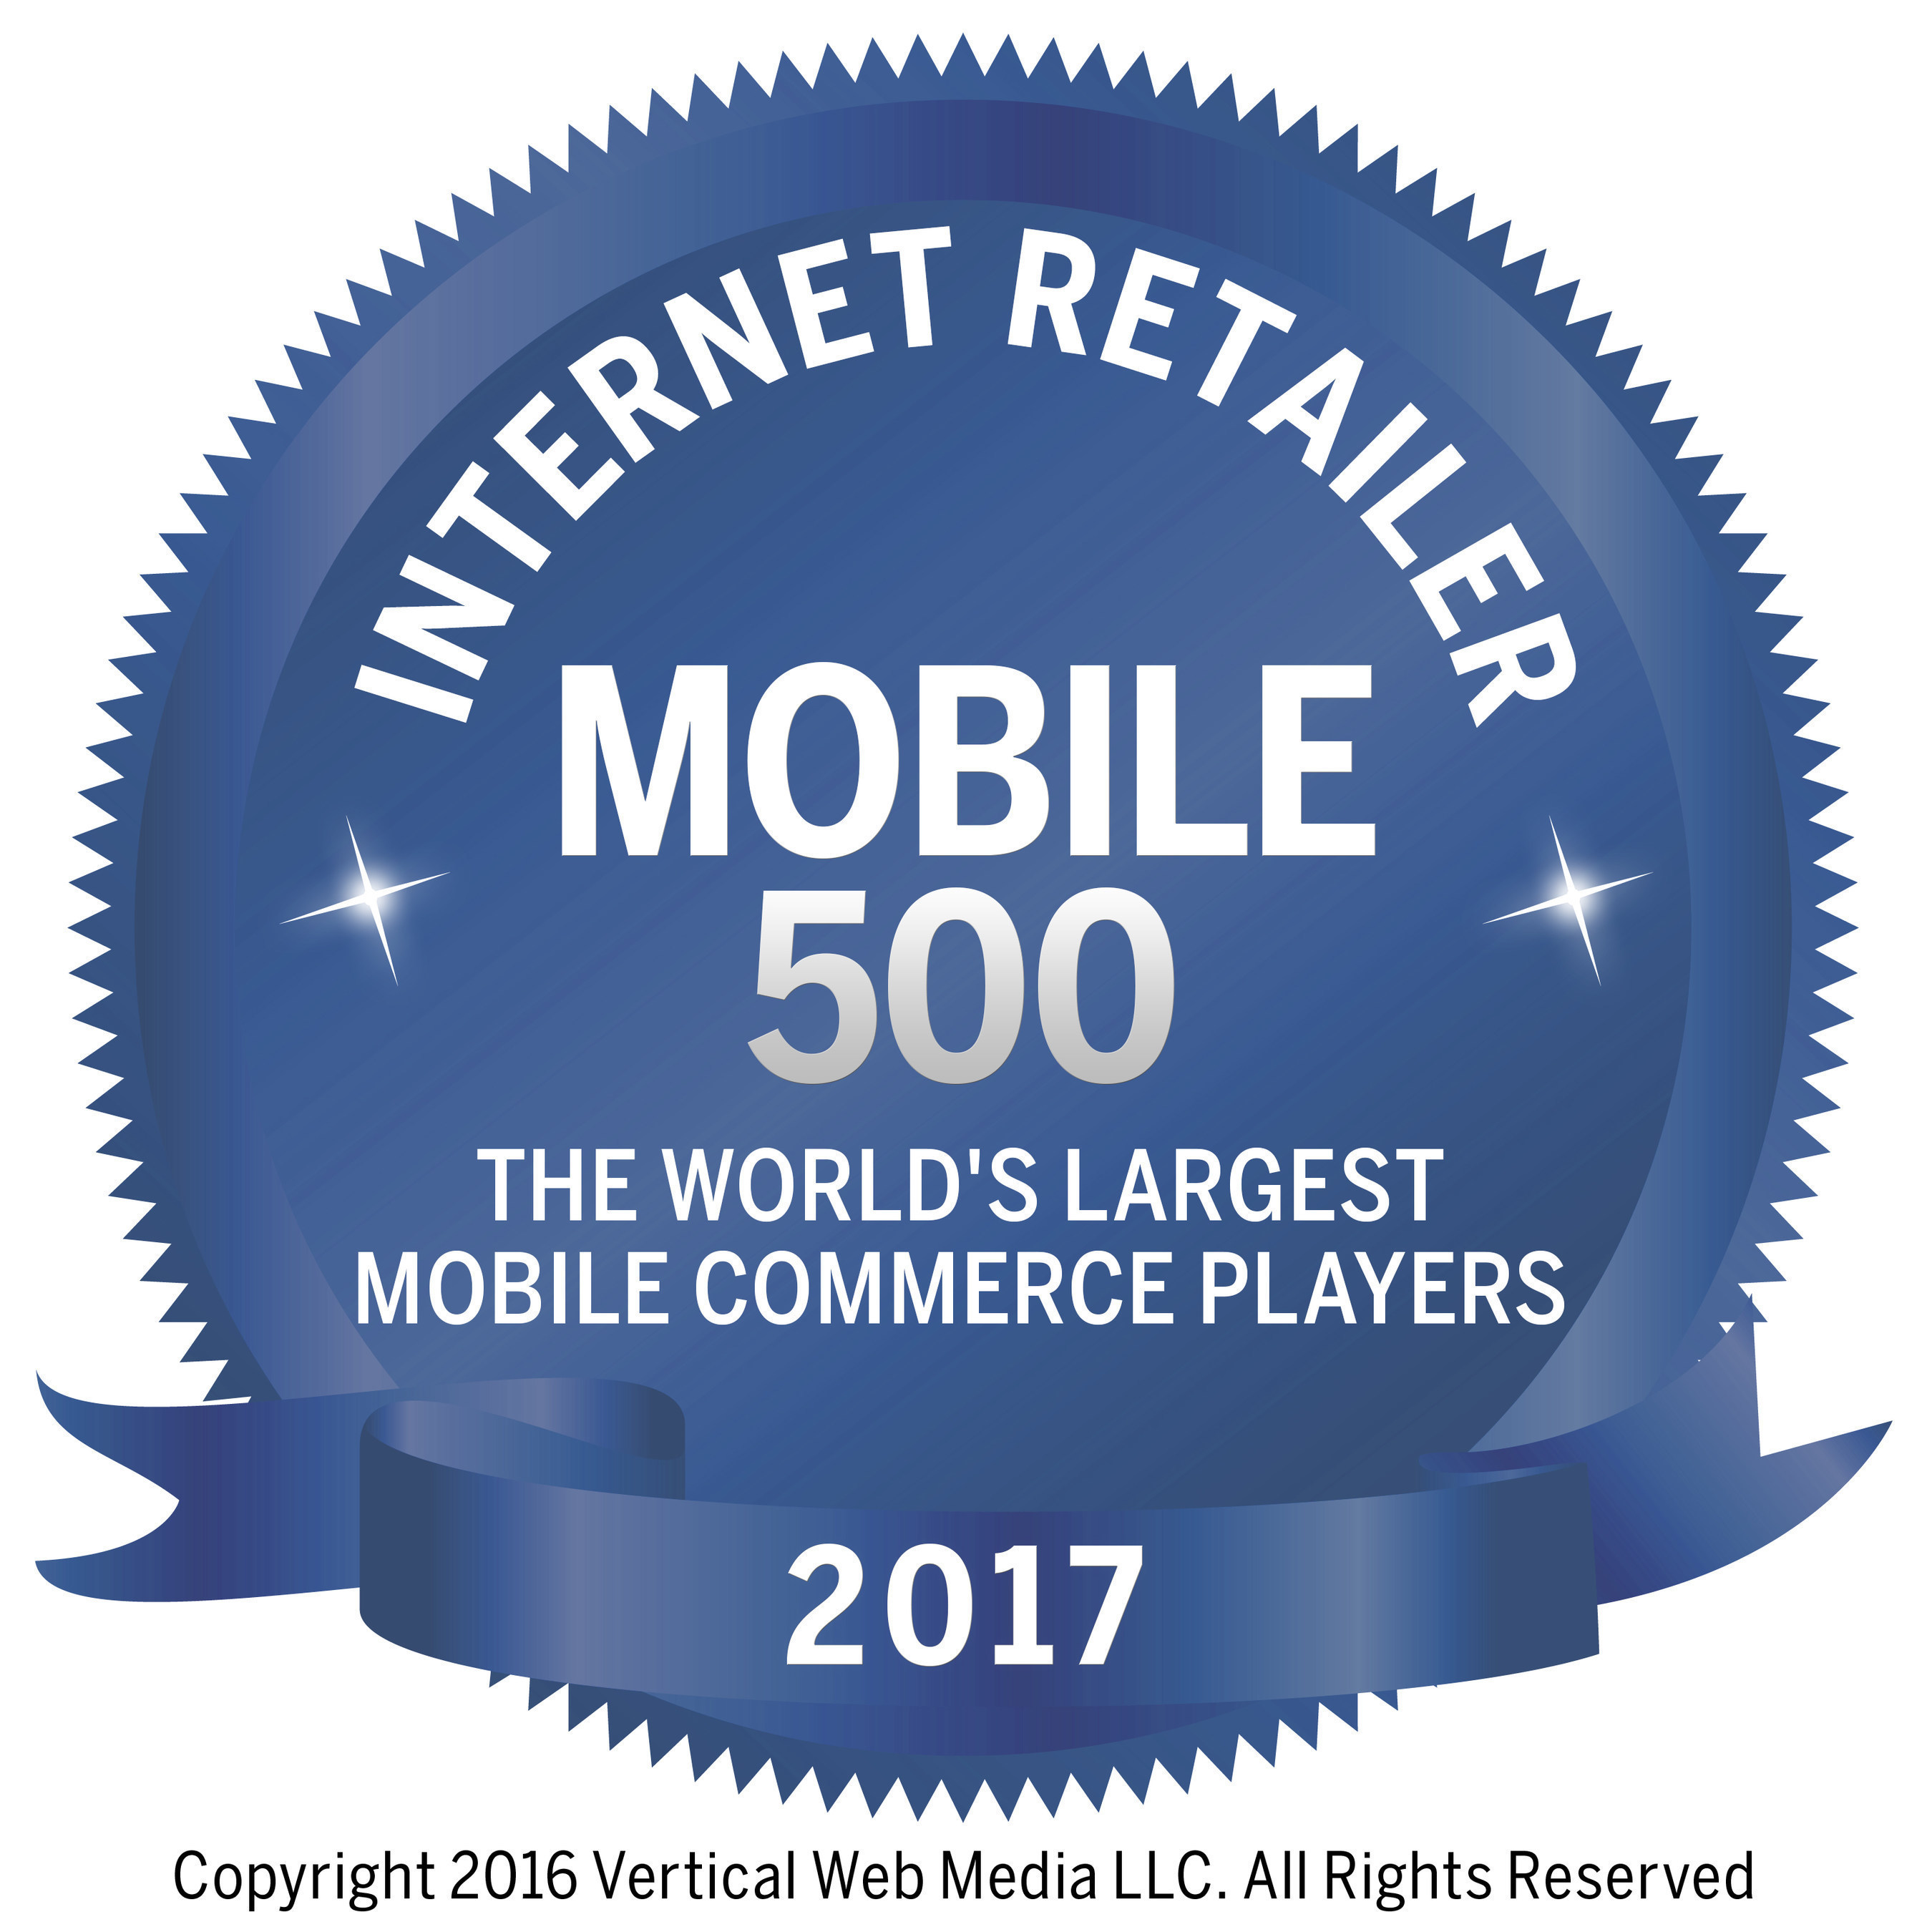 Purchasing Power, LLC ranked #103 in the Internet Retailer 2017 Mobile 500, up from #156 in 2016.